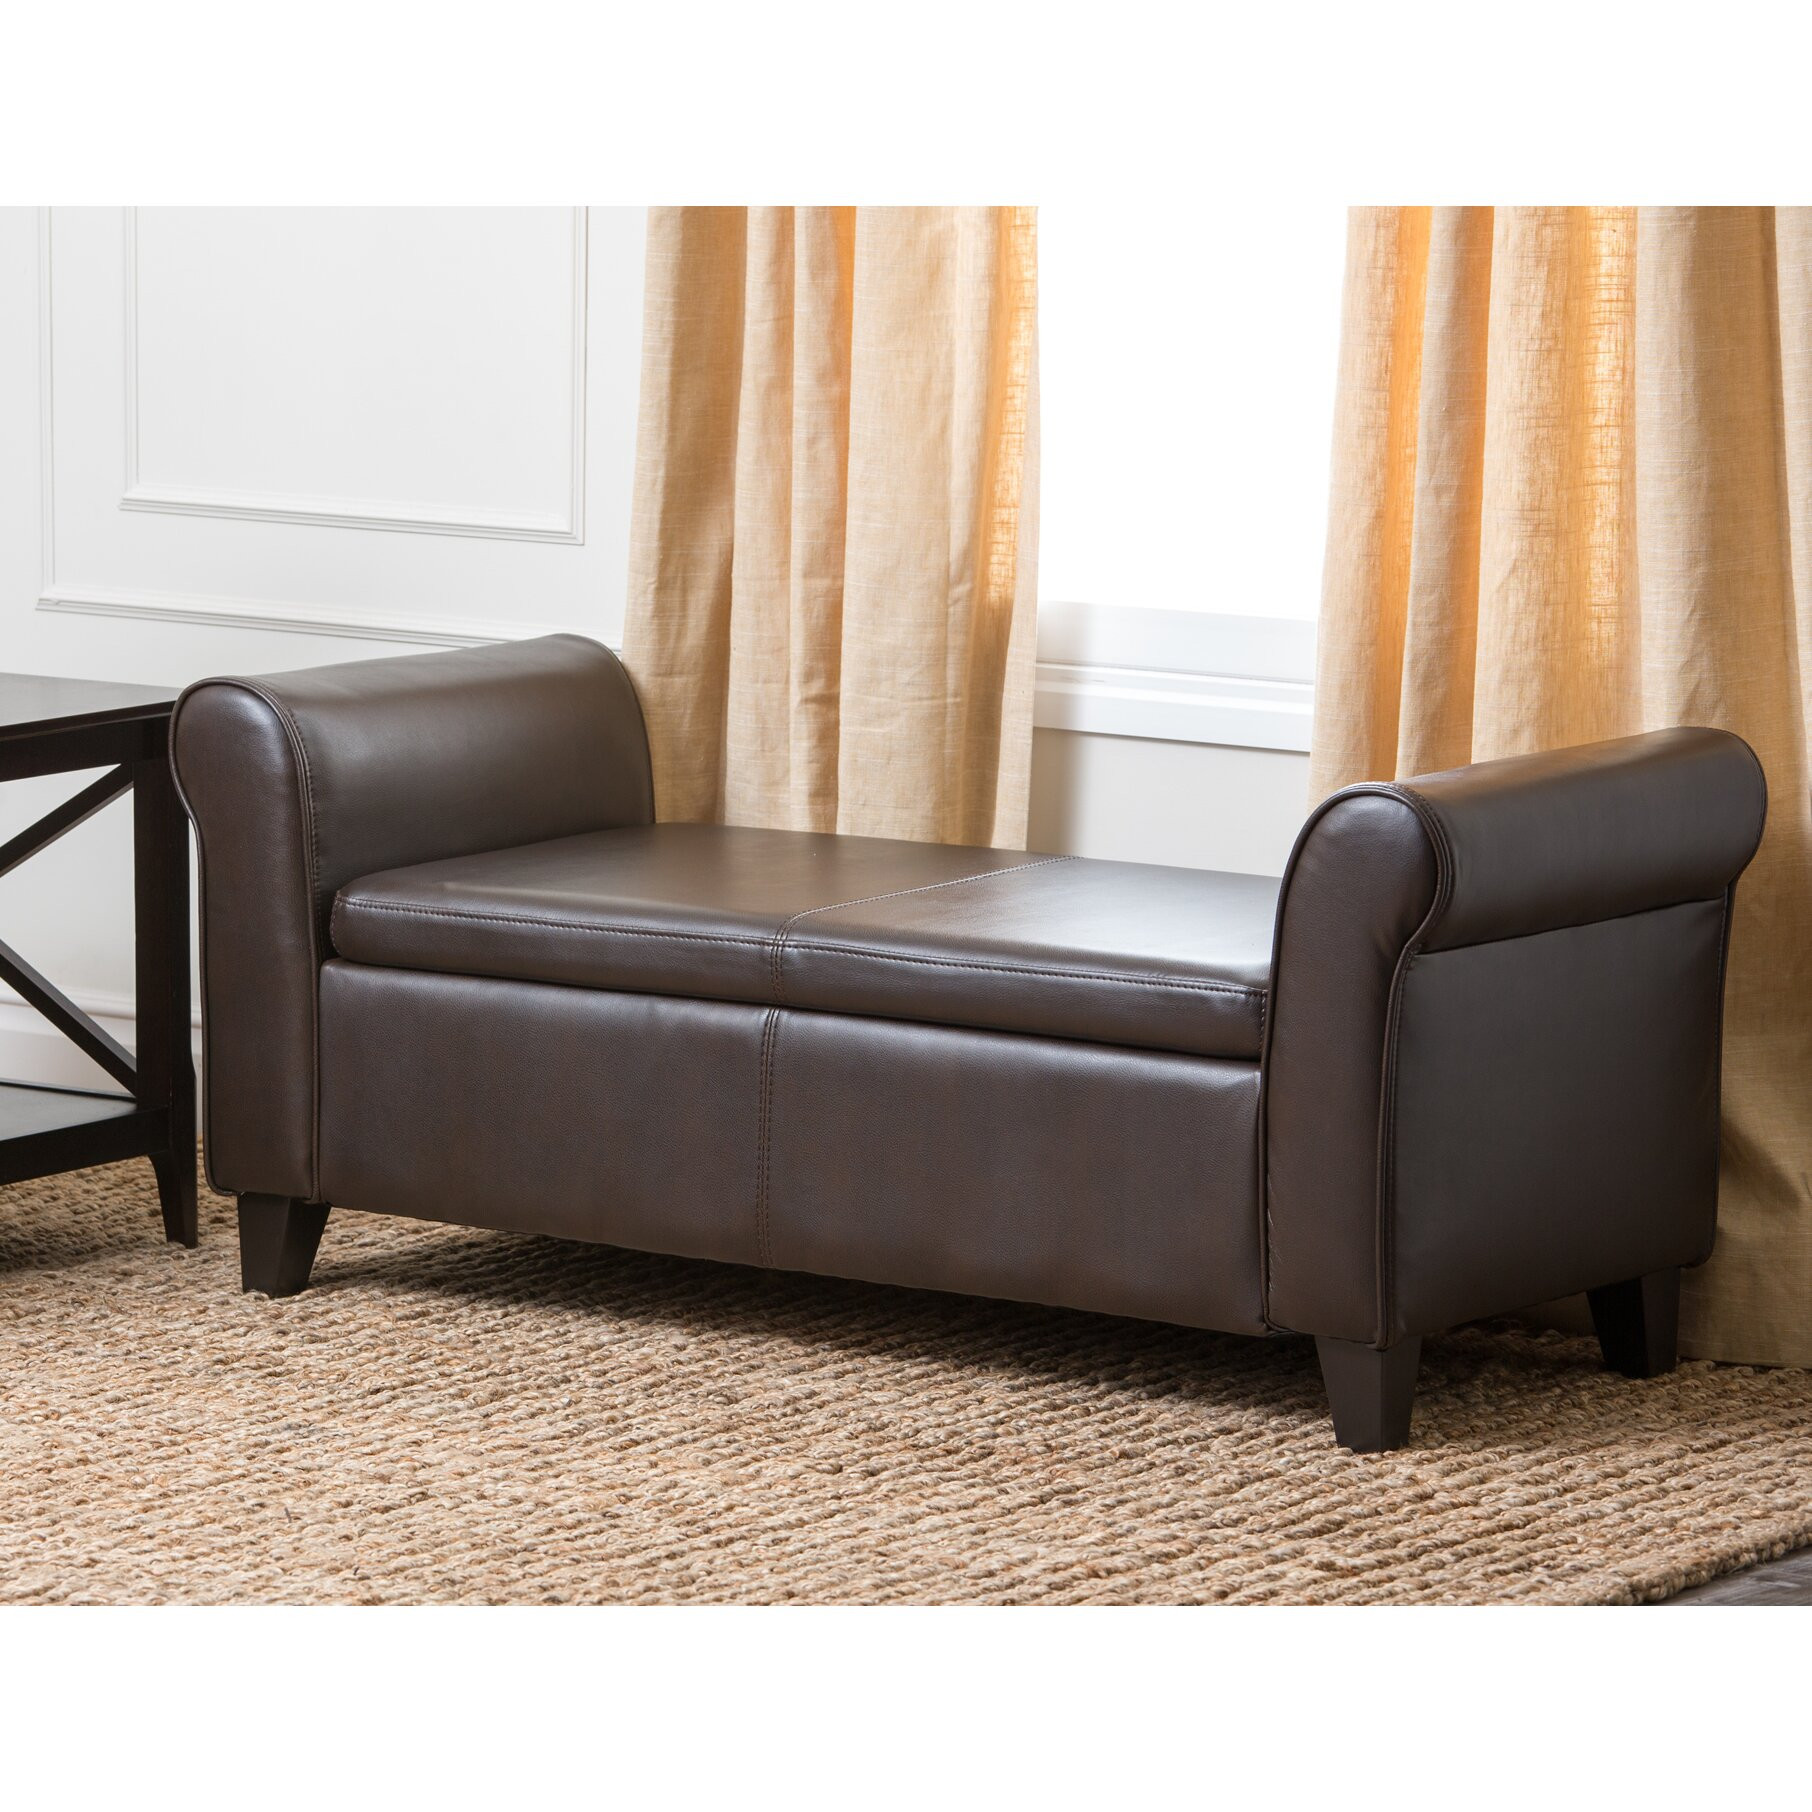 Storage Benches For Bedroom
 Abbyson Living Easton Leather Bedroom Storage Bench